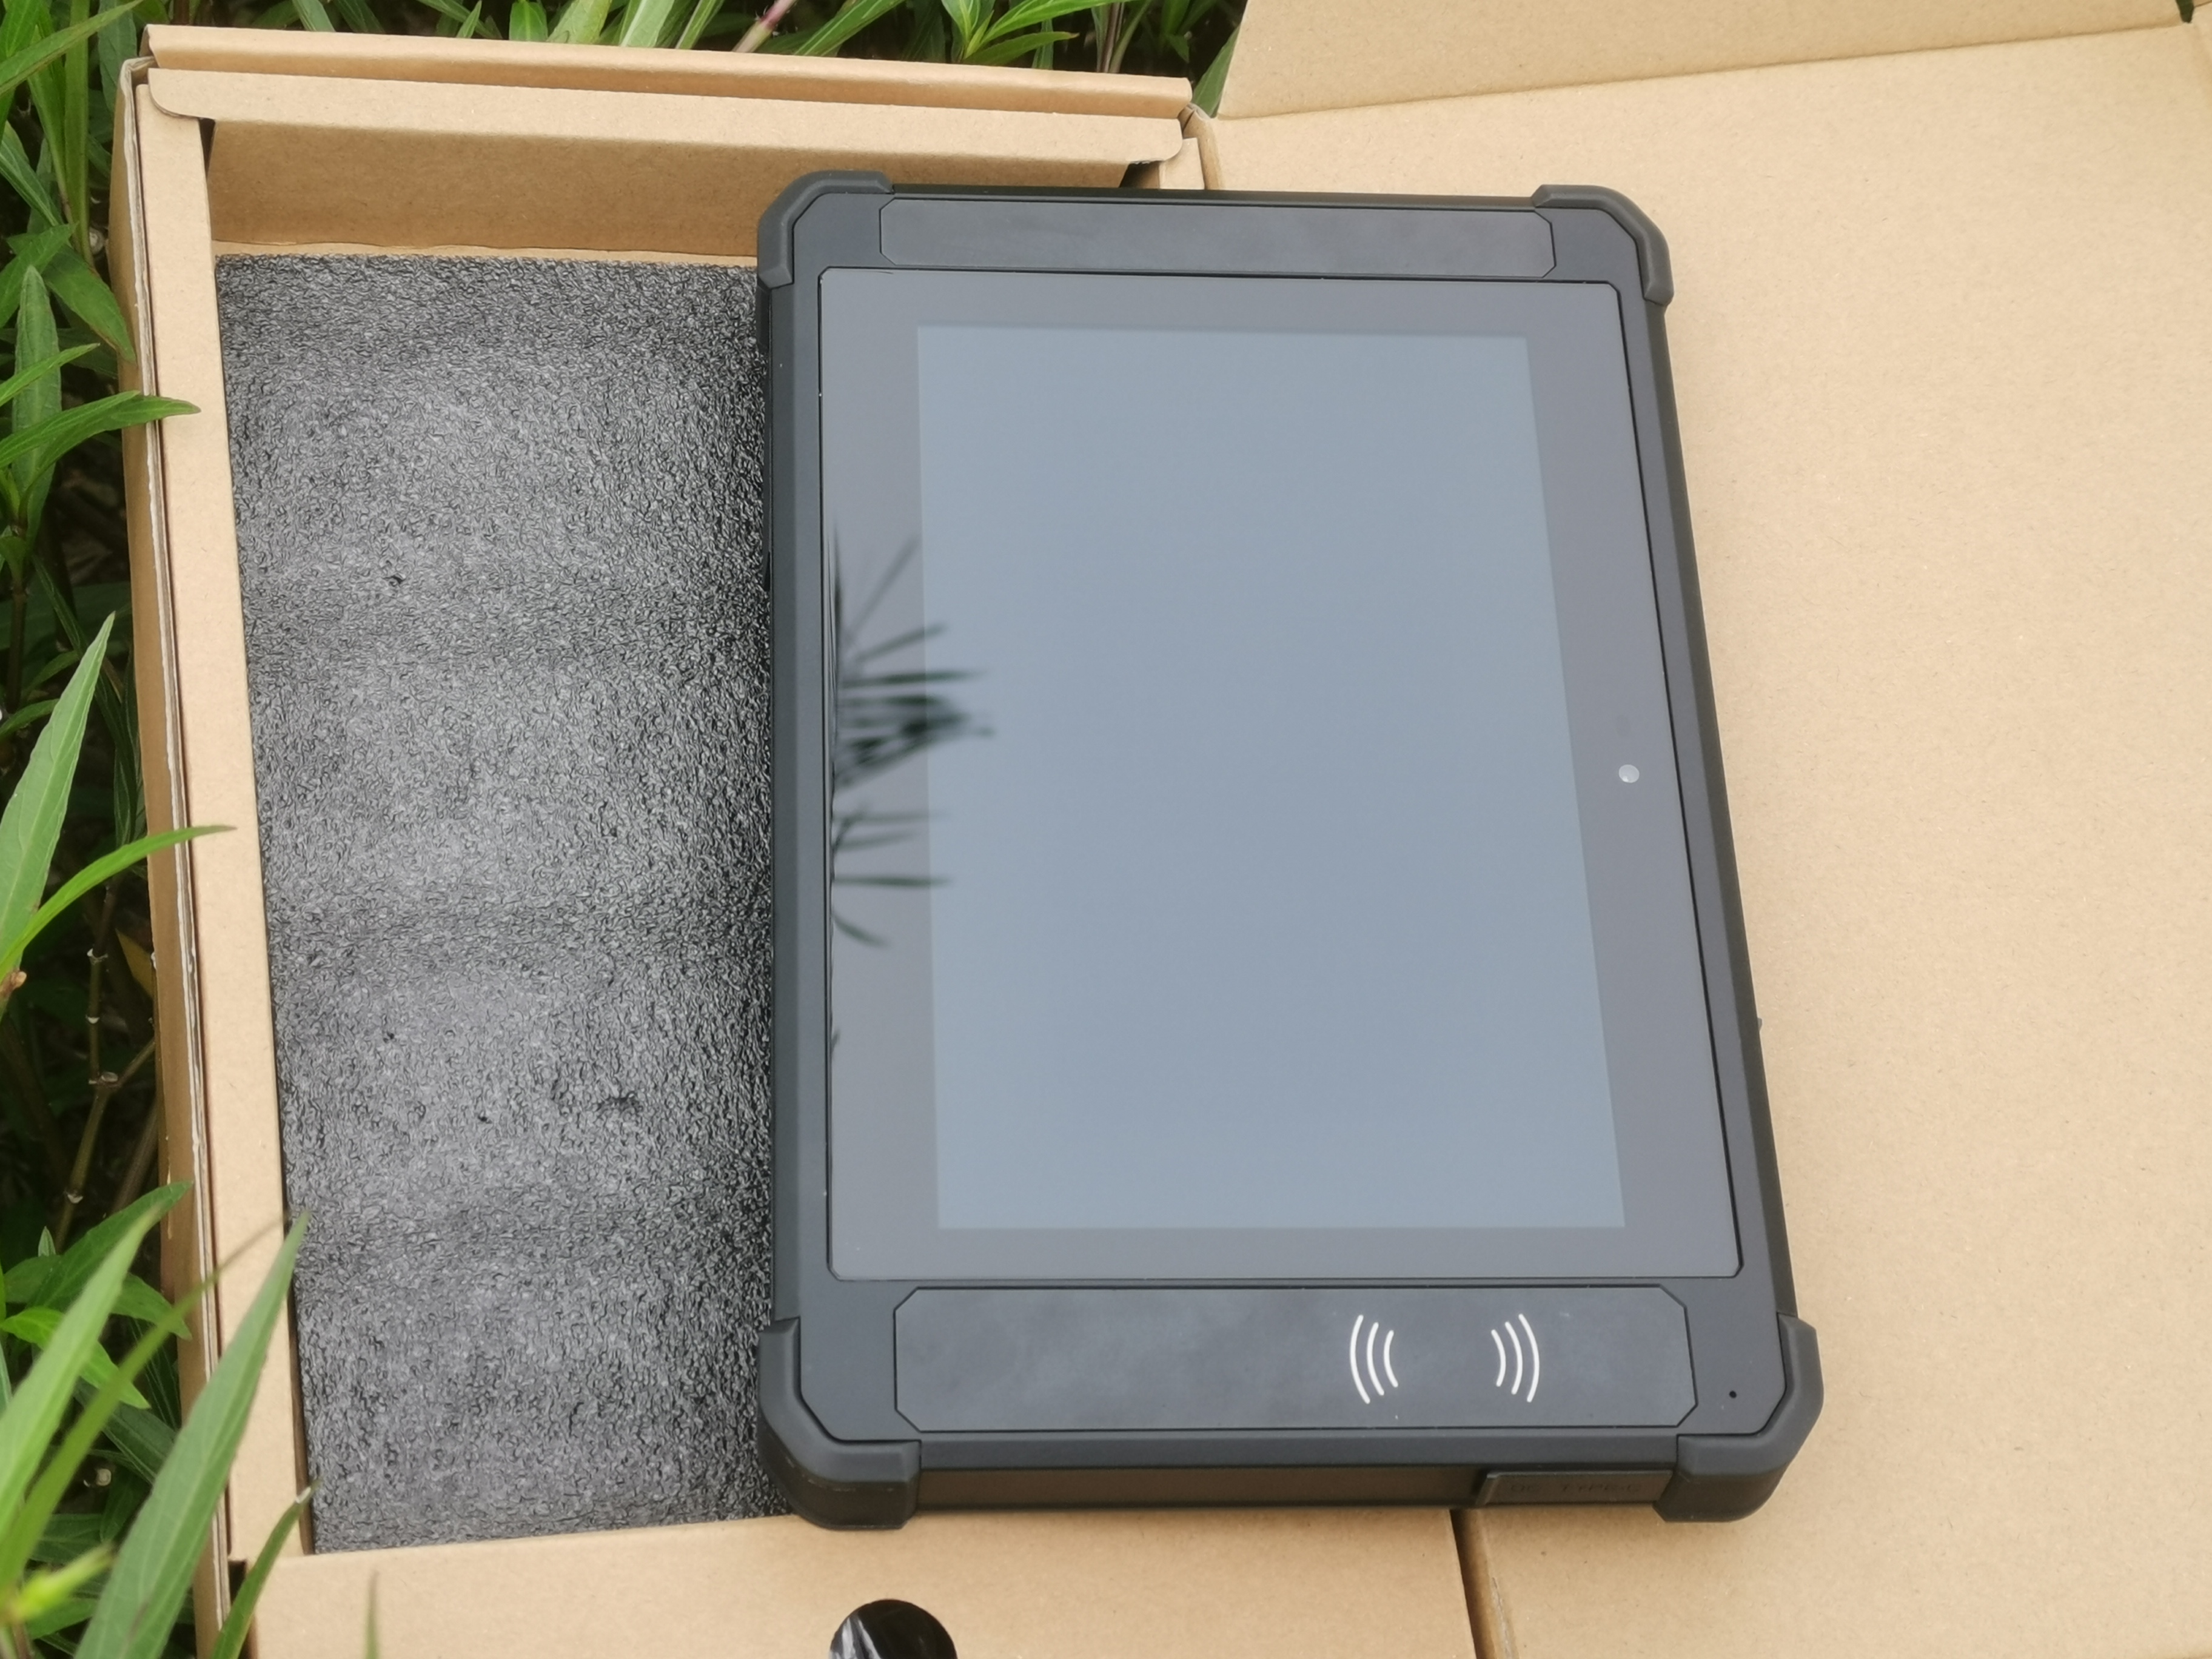 What are the differences between rugged tablets and medical tablets?